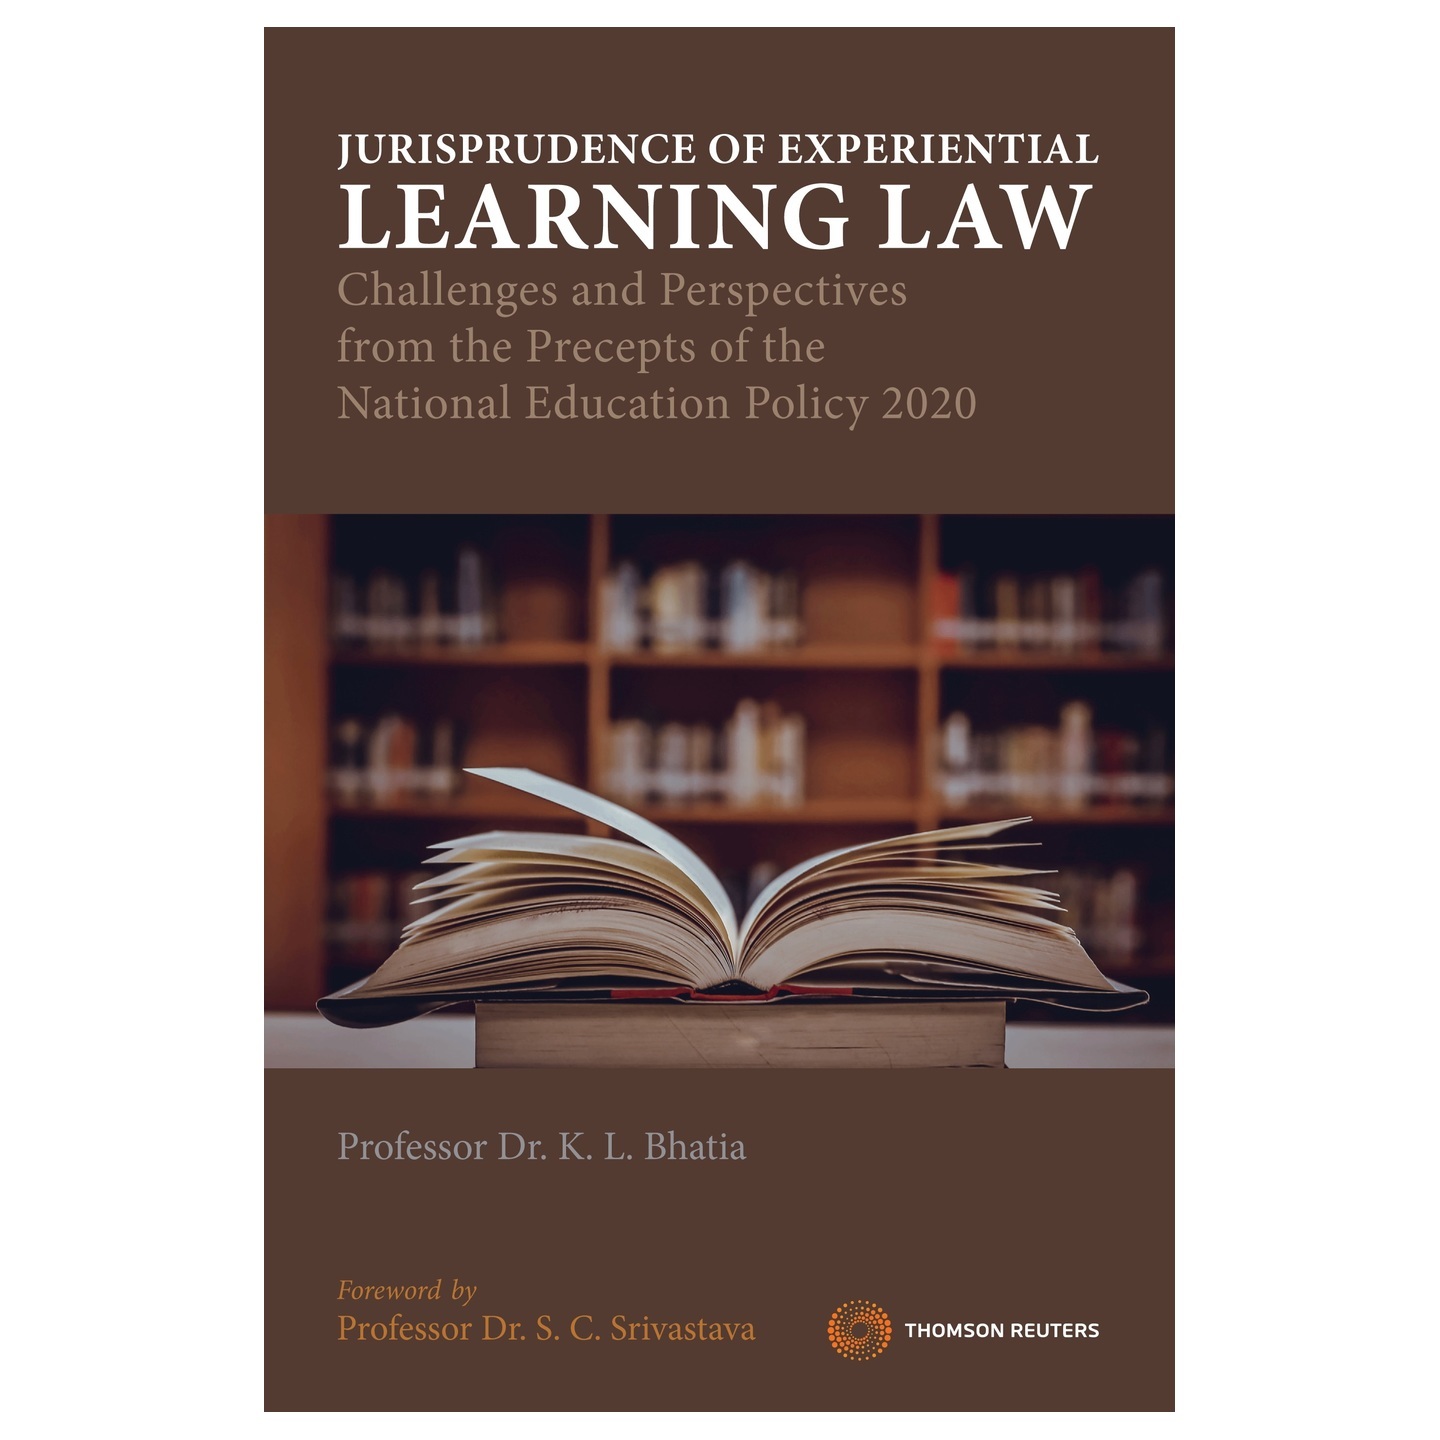 Jurisprudence of Experiential Learning Law: Challenges and Perspectives from the Precepts of the National Education Policy 2020